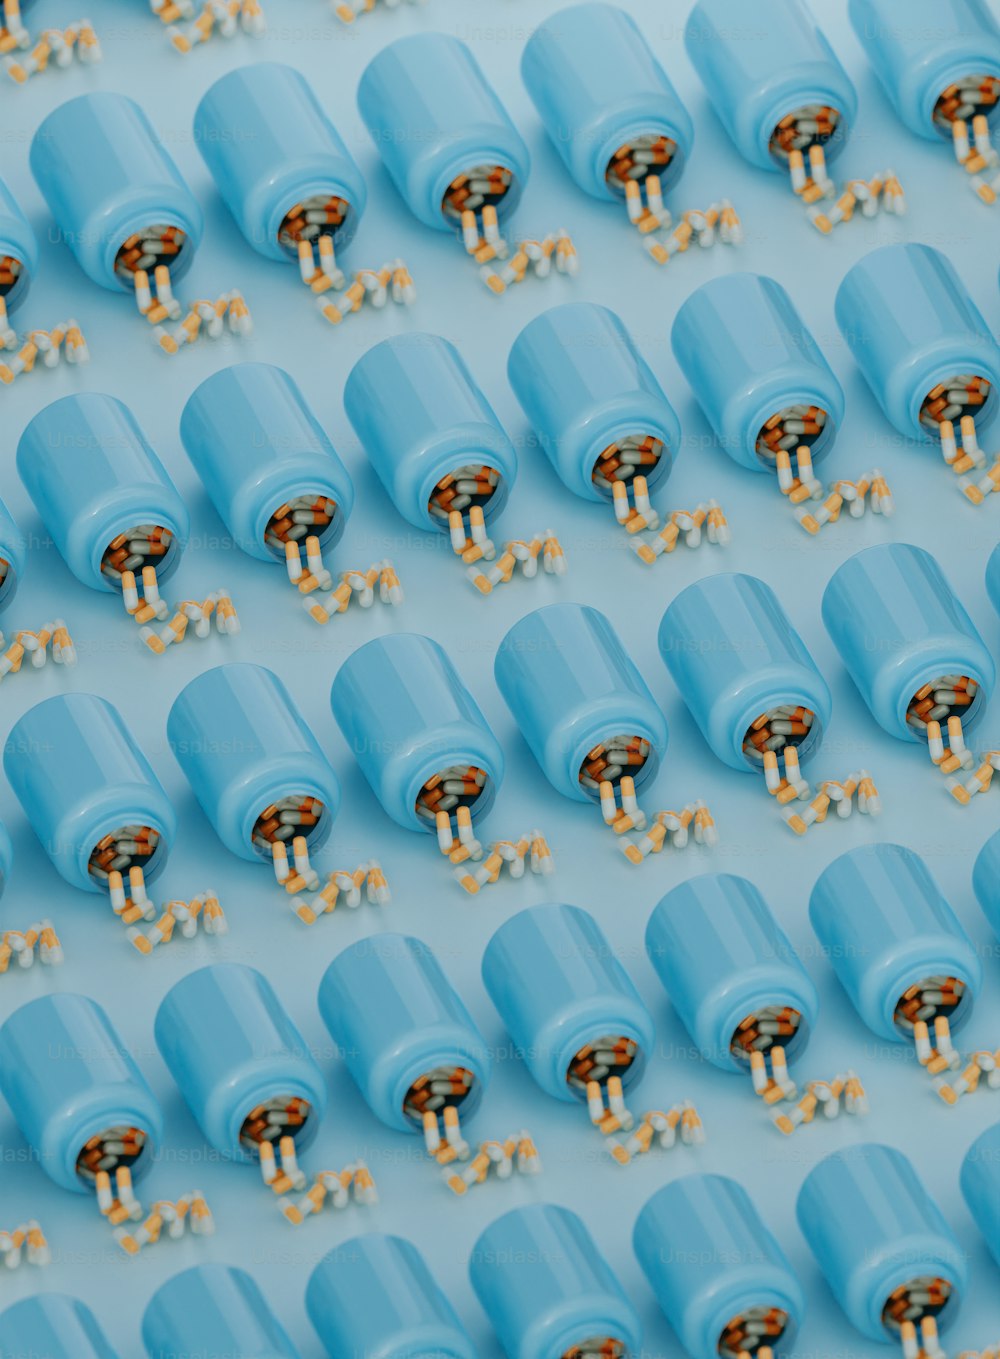 a group of blue electrical components on a blue surface